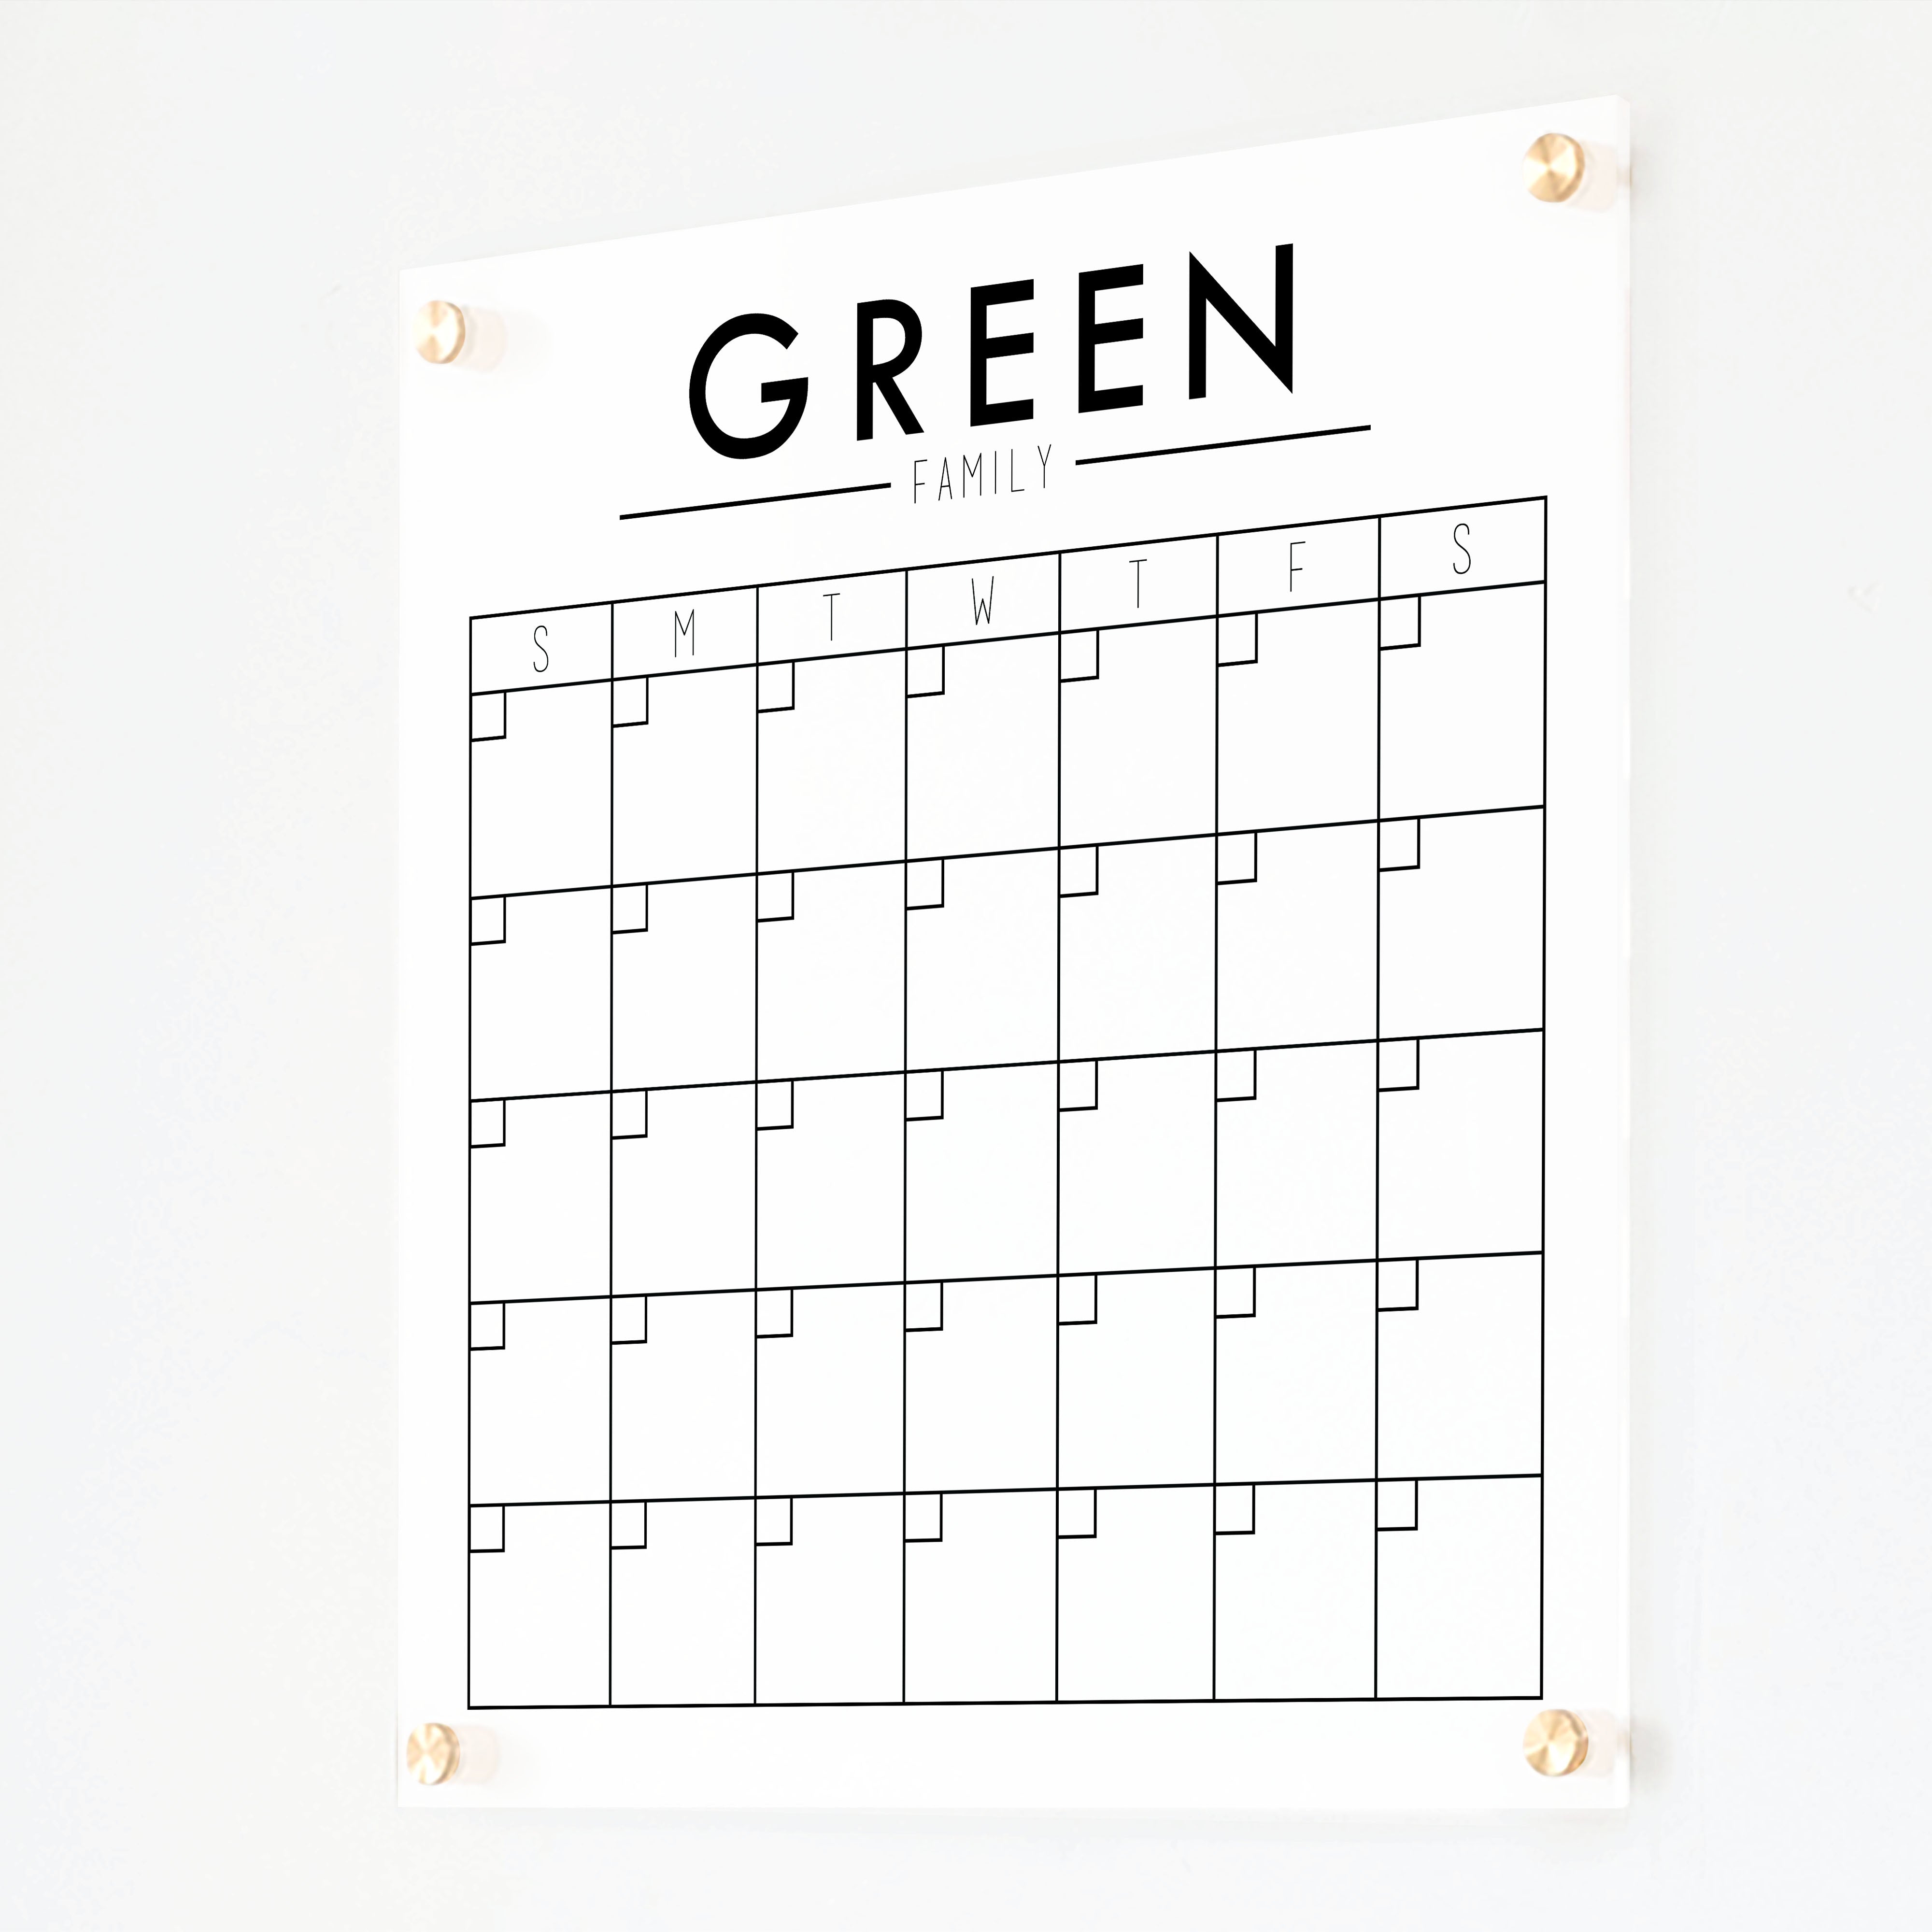 Monthly Frosted Acrylic Calendar | Vertical Craig